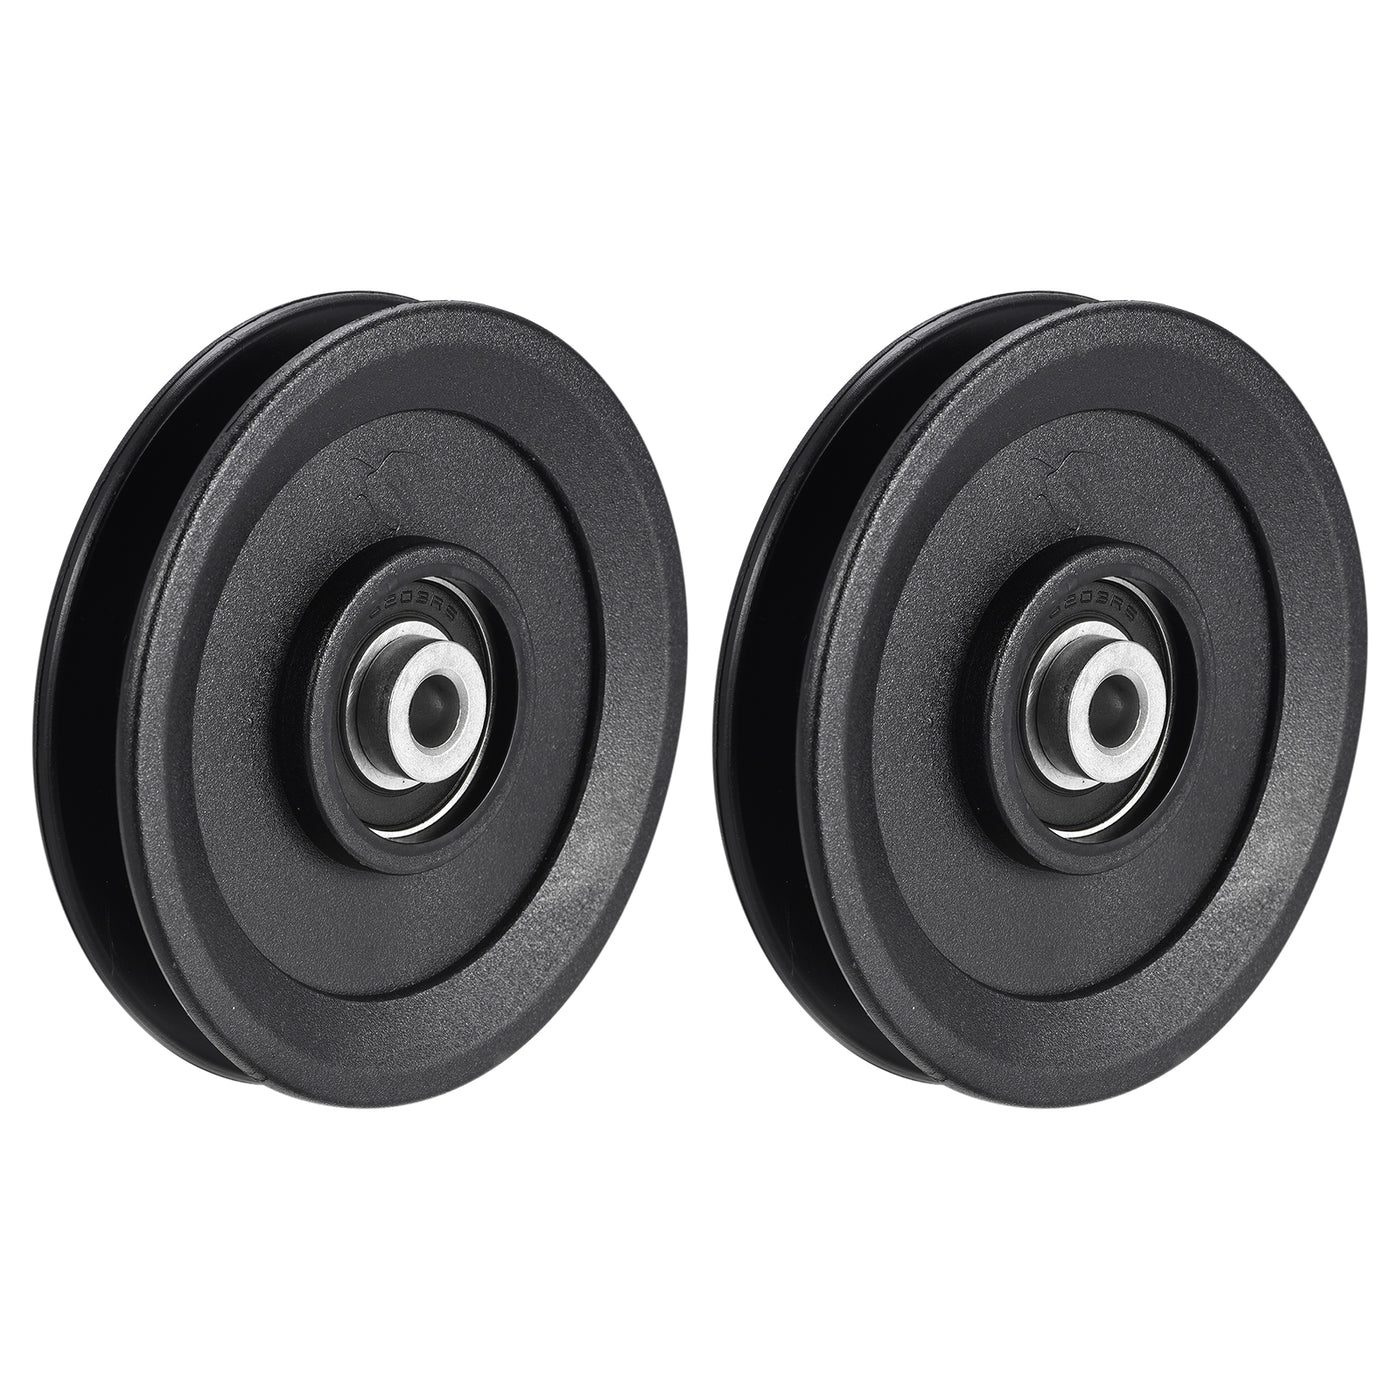 uxcell Uxcell 113mm Bearing Pulley Wheel Cable Fitness Equipment Accessories 2pcs